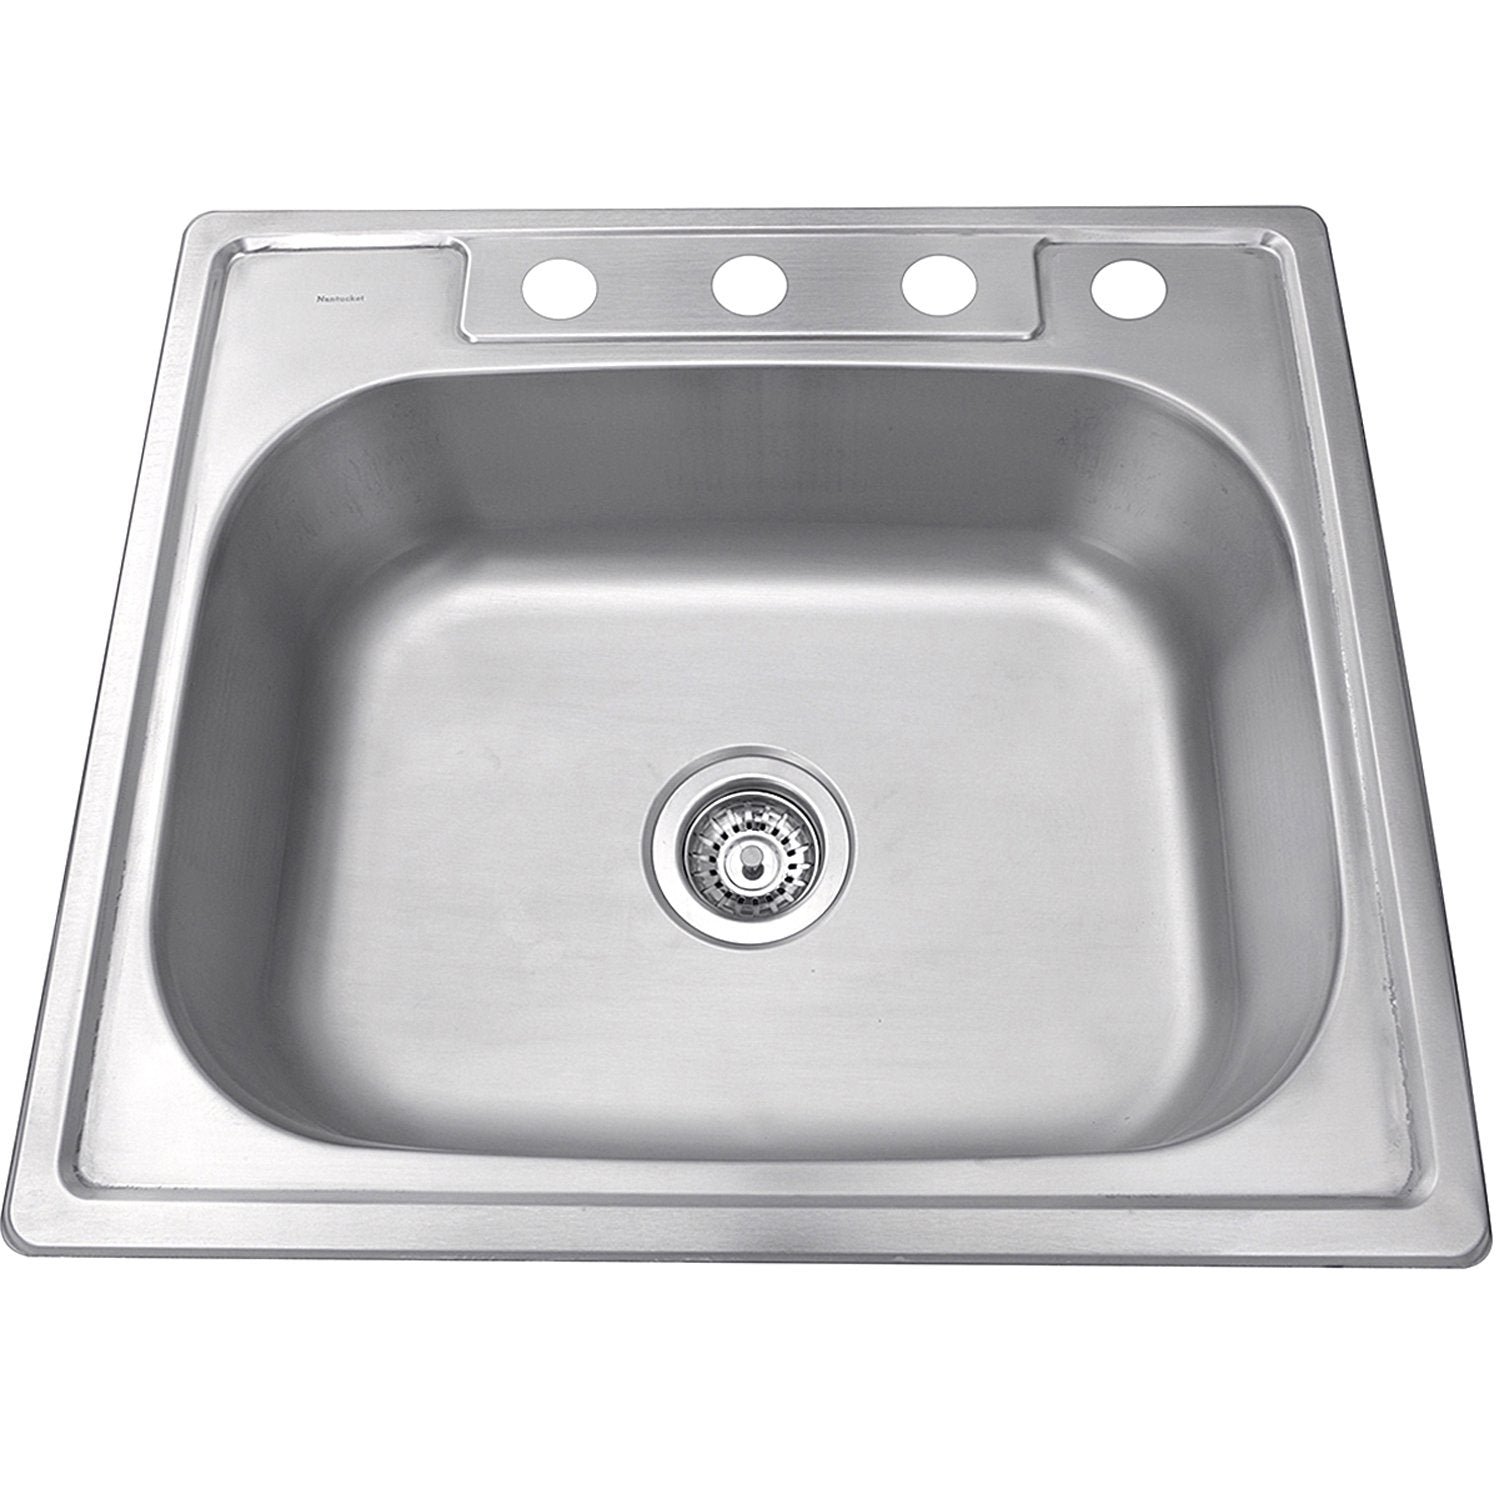 Nantucket Sinks NS2522-8 - 25" Small Rectangle Single Bowl Self Rimming Stainless Steel Drop In Kitchen Sink, 18 Gauge